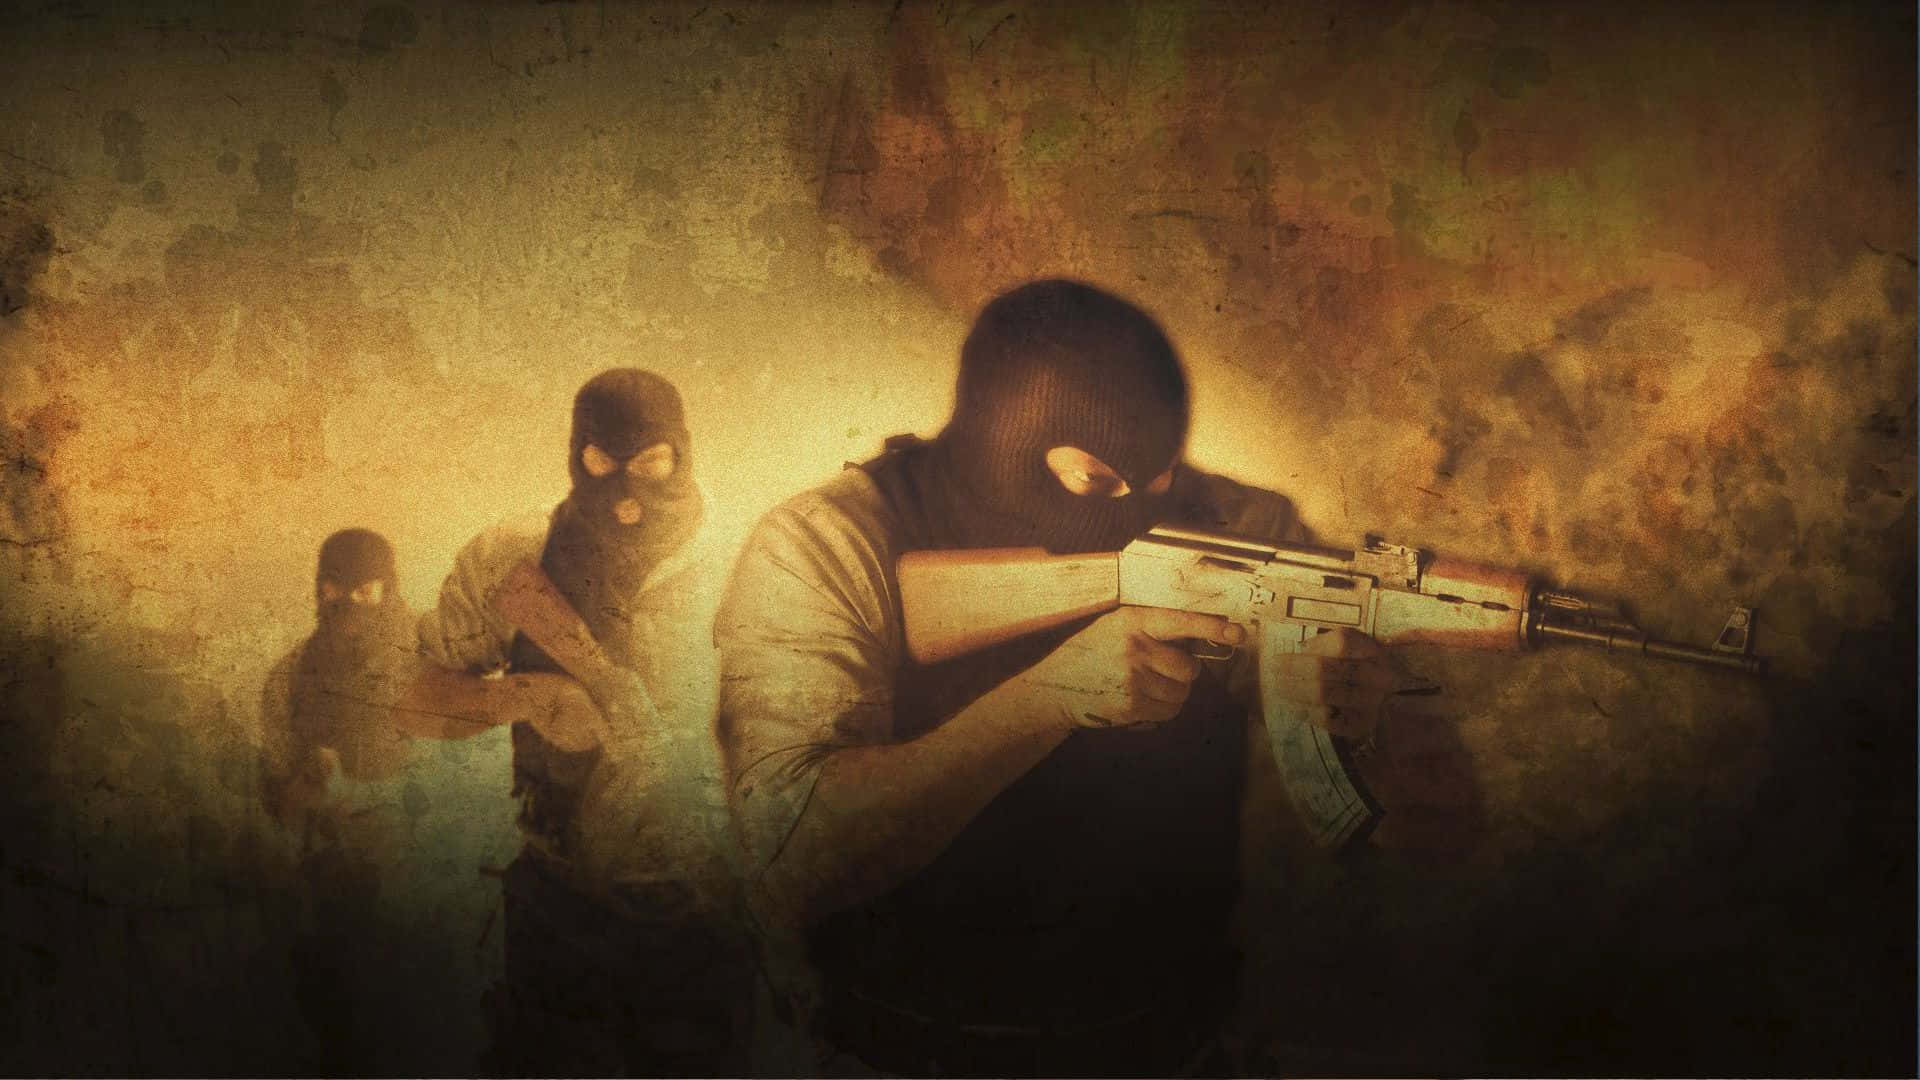 Counter strike Global Offensive Live Wallpaper Free